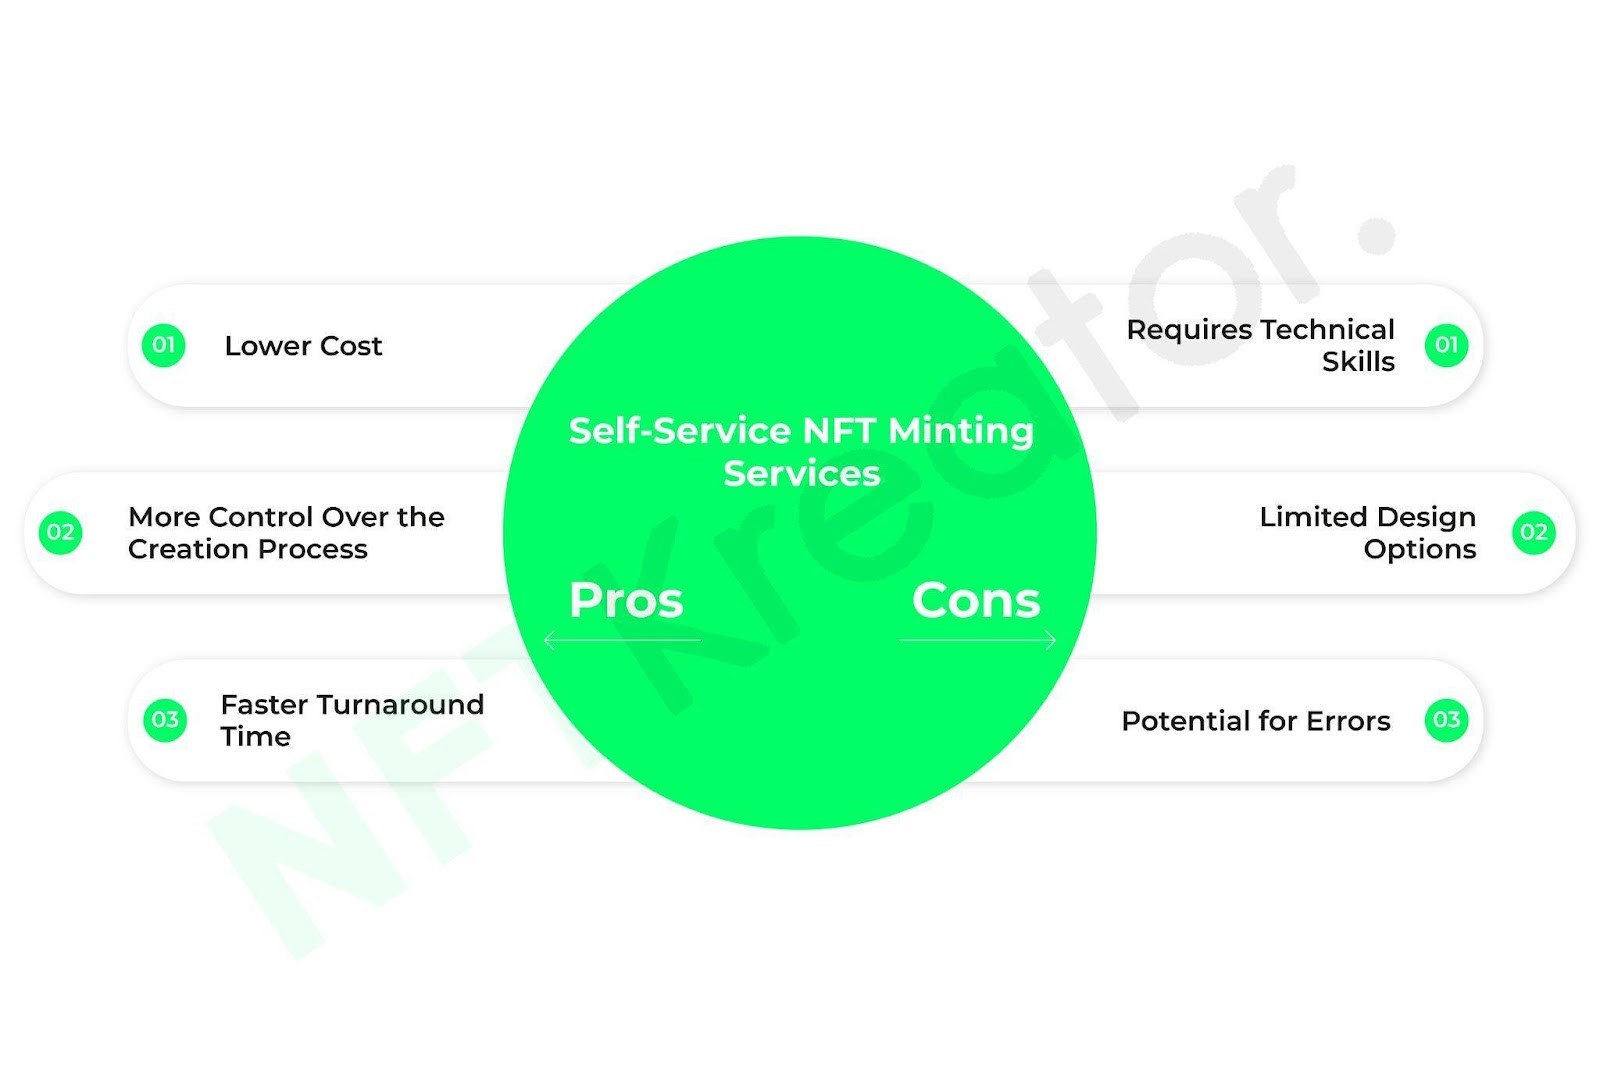 This Image Illustrates The Pros And Cons Of Self-Service NFT Minting Services. 
                        https://nftkreator.com/miniting-an-nft/